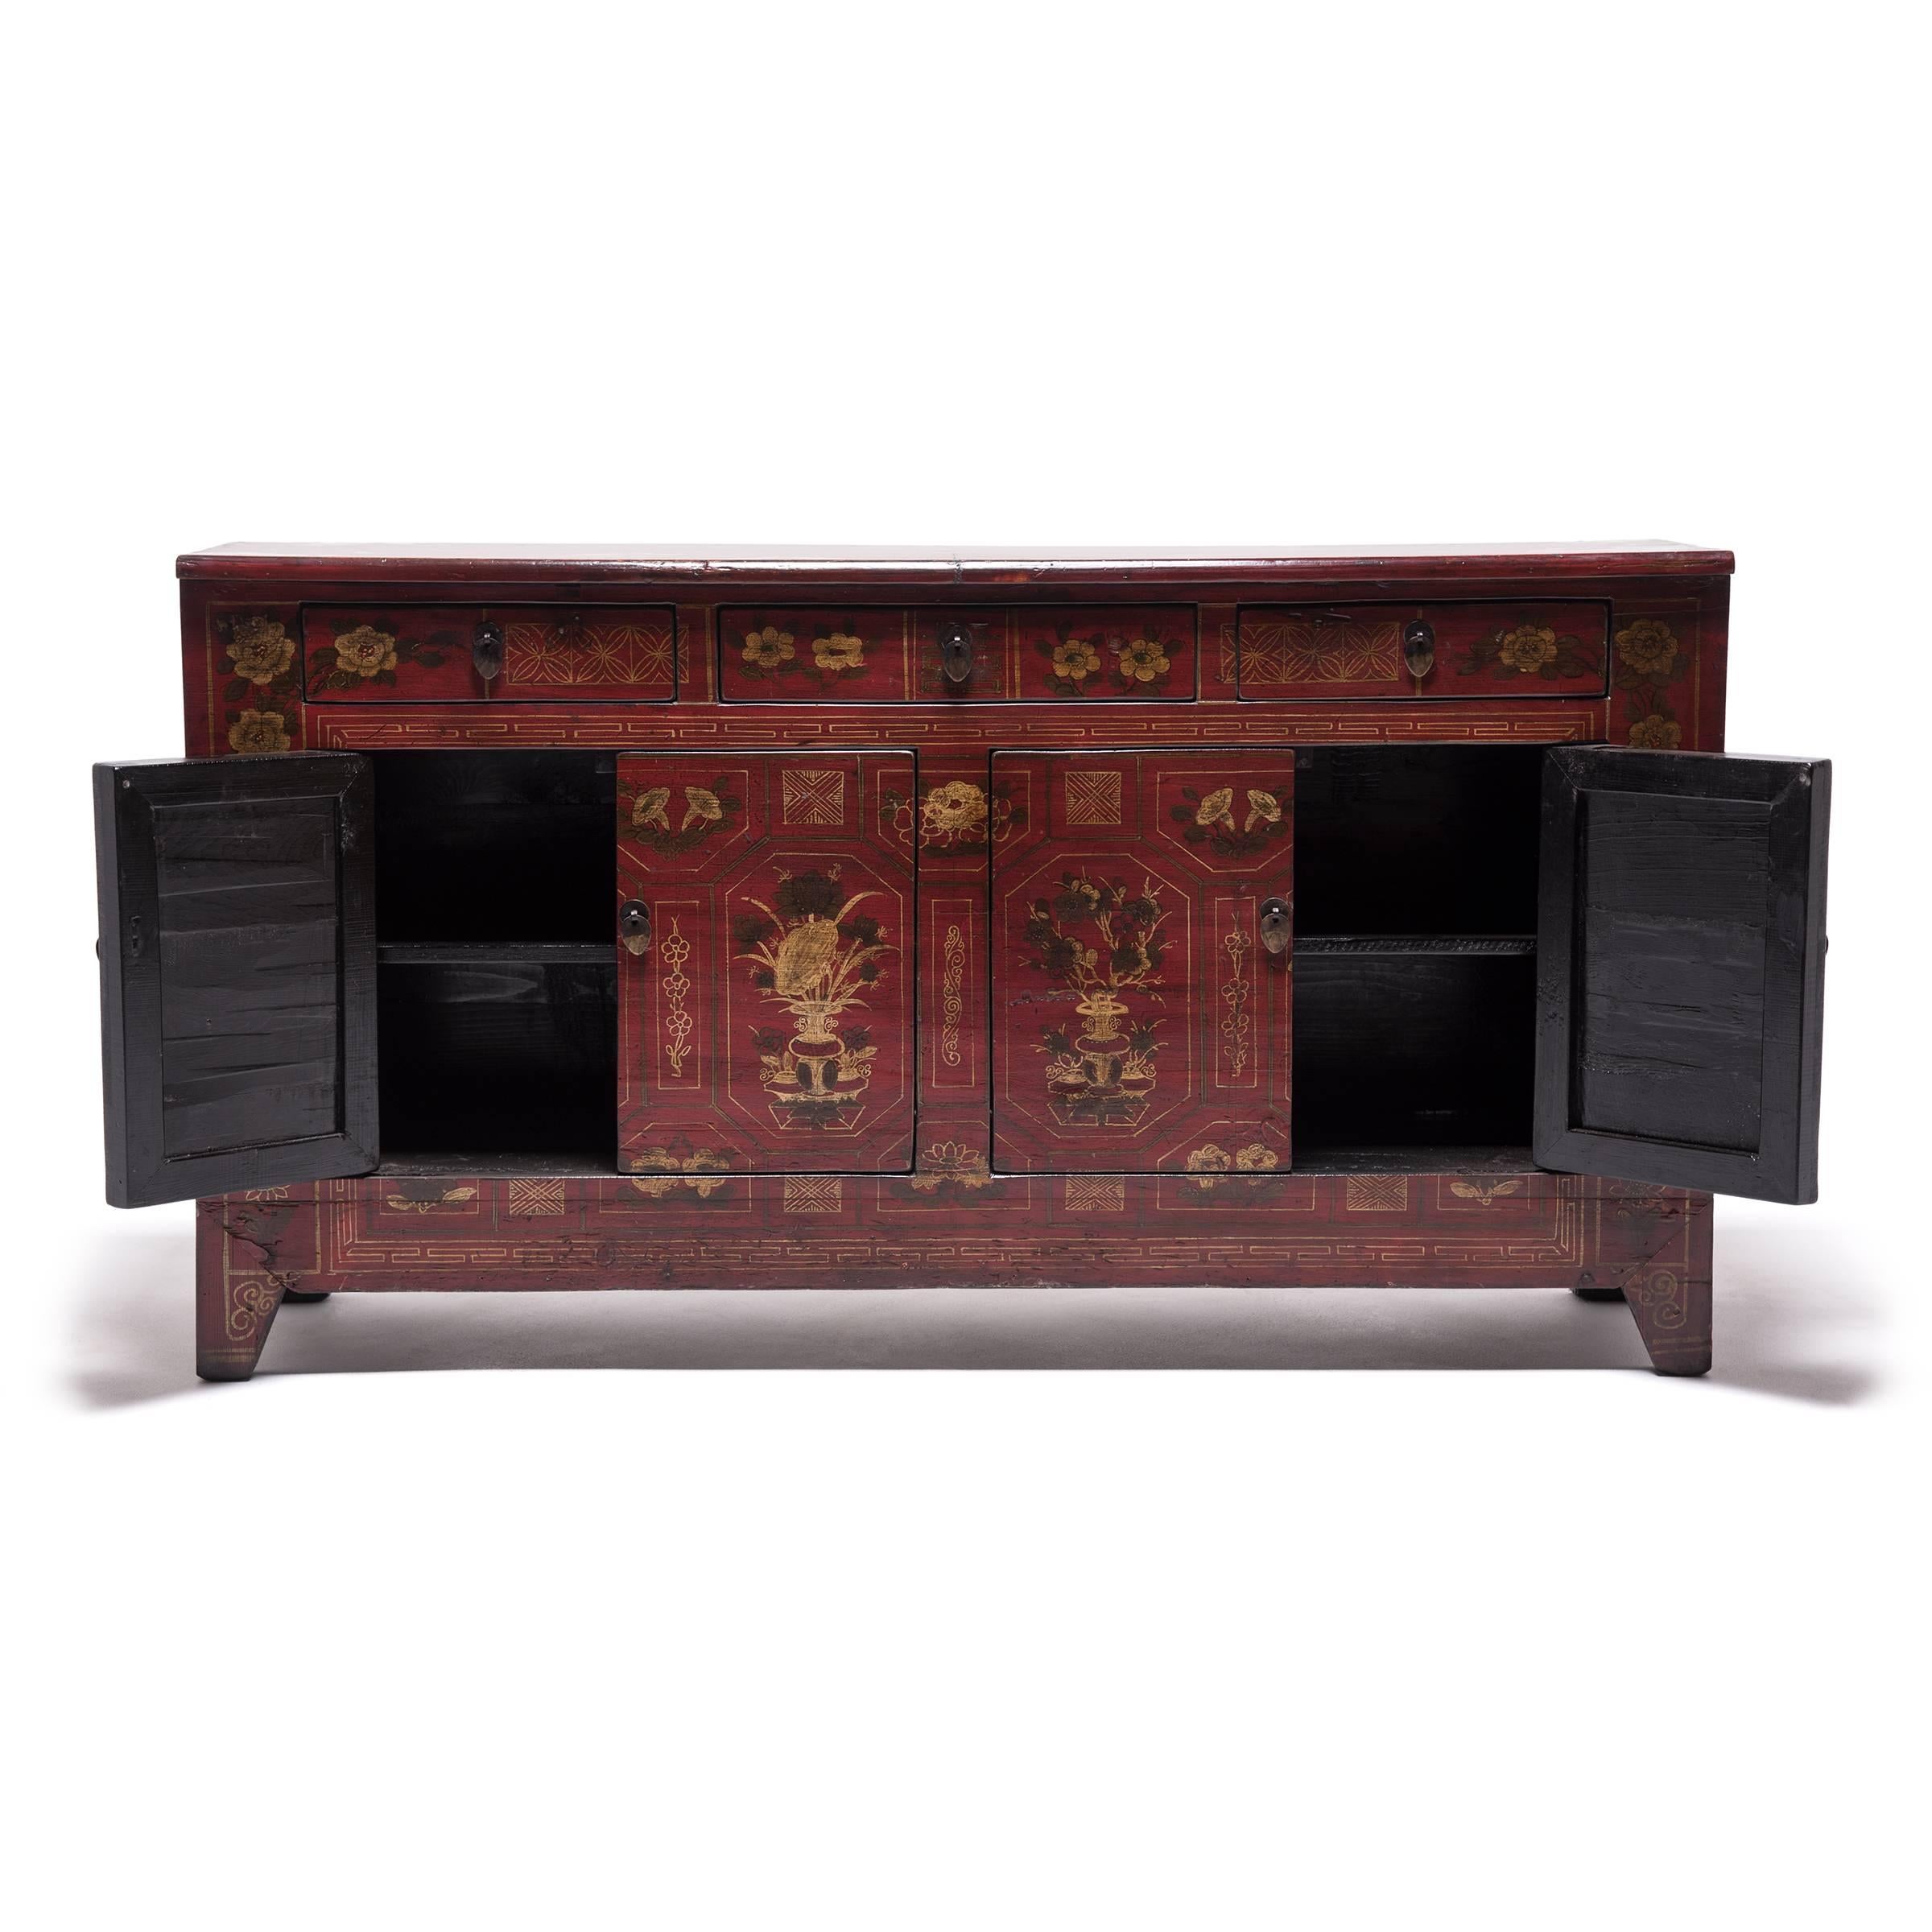 A skilled Mongolian artisan made this beautiful, antique cabinet. The craftsmanship is evident in the intricately painted floral designs and concealed hinges and joinery. The cabinet is painted with distinctively eastern aesthetic, but the simple,